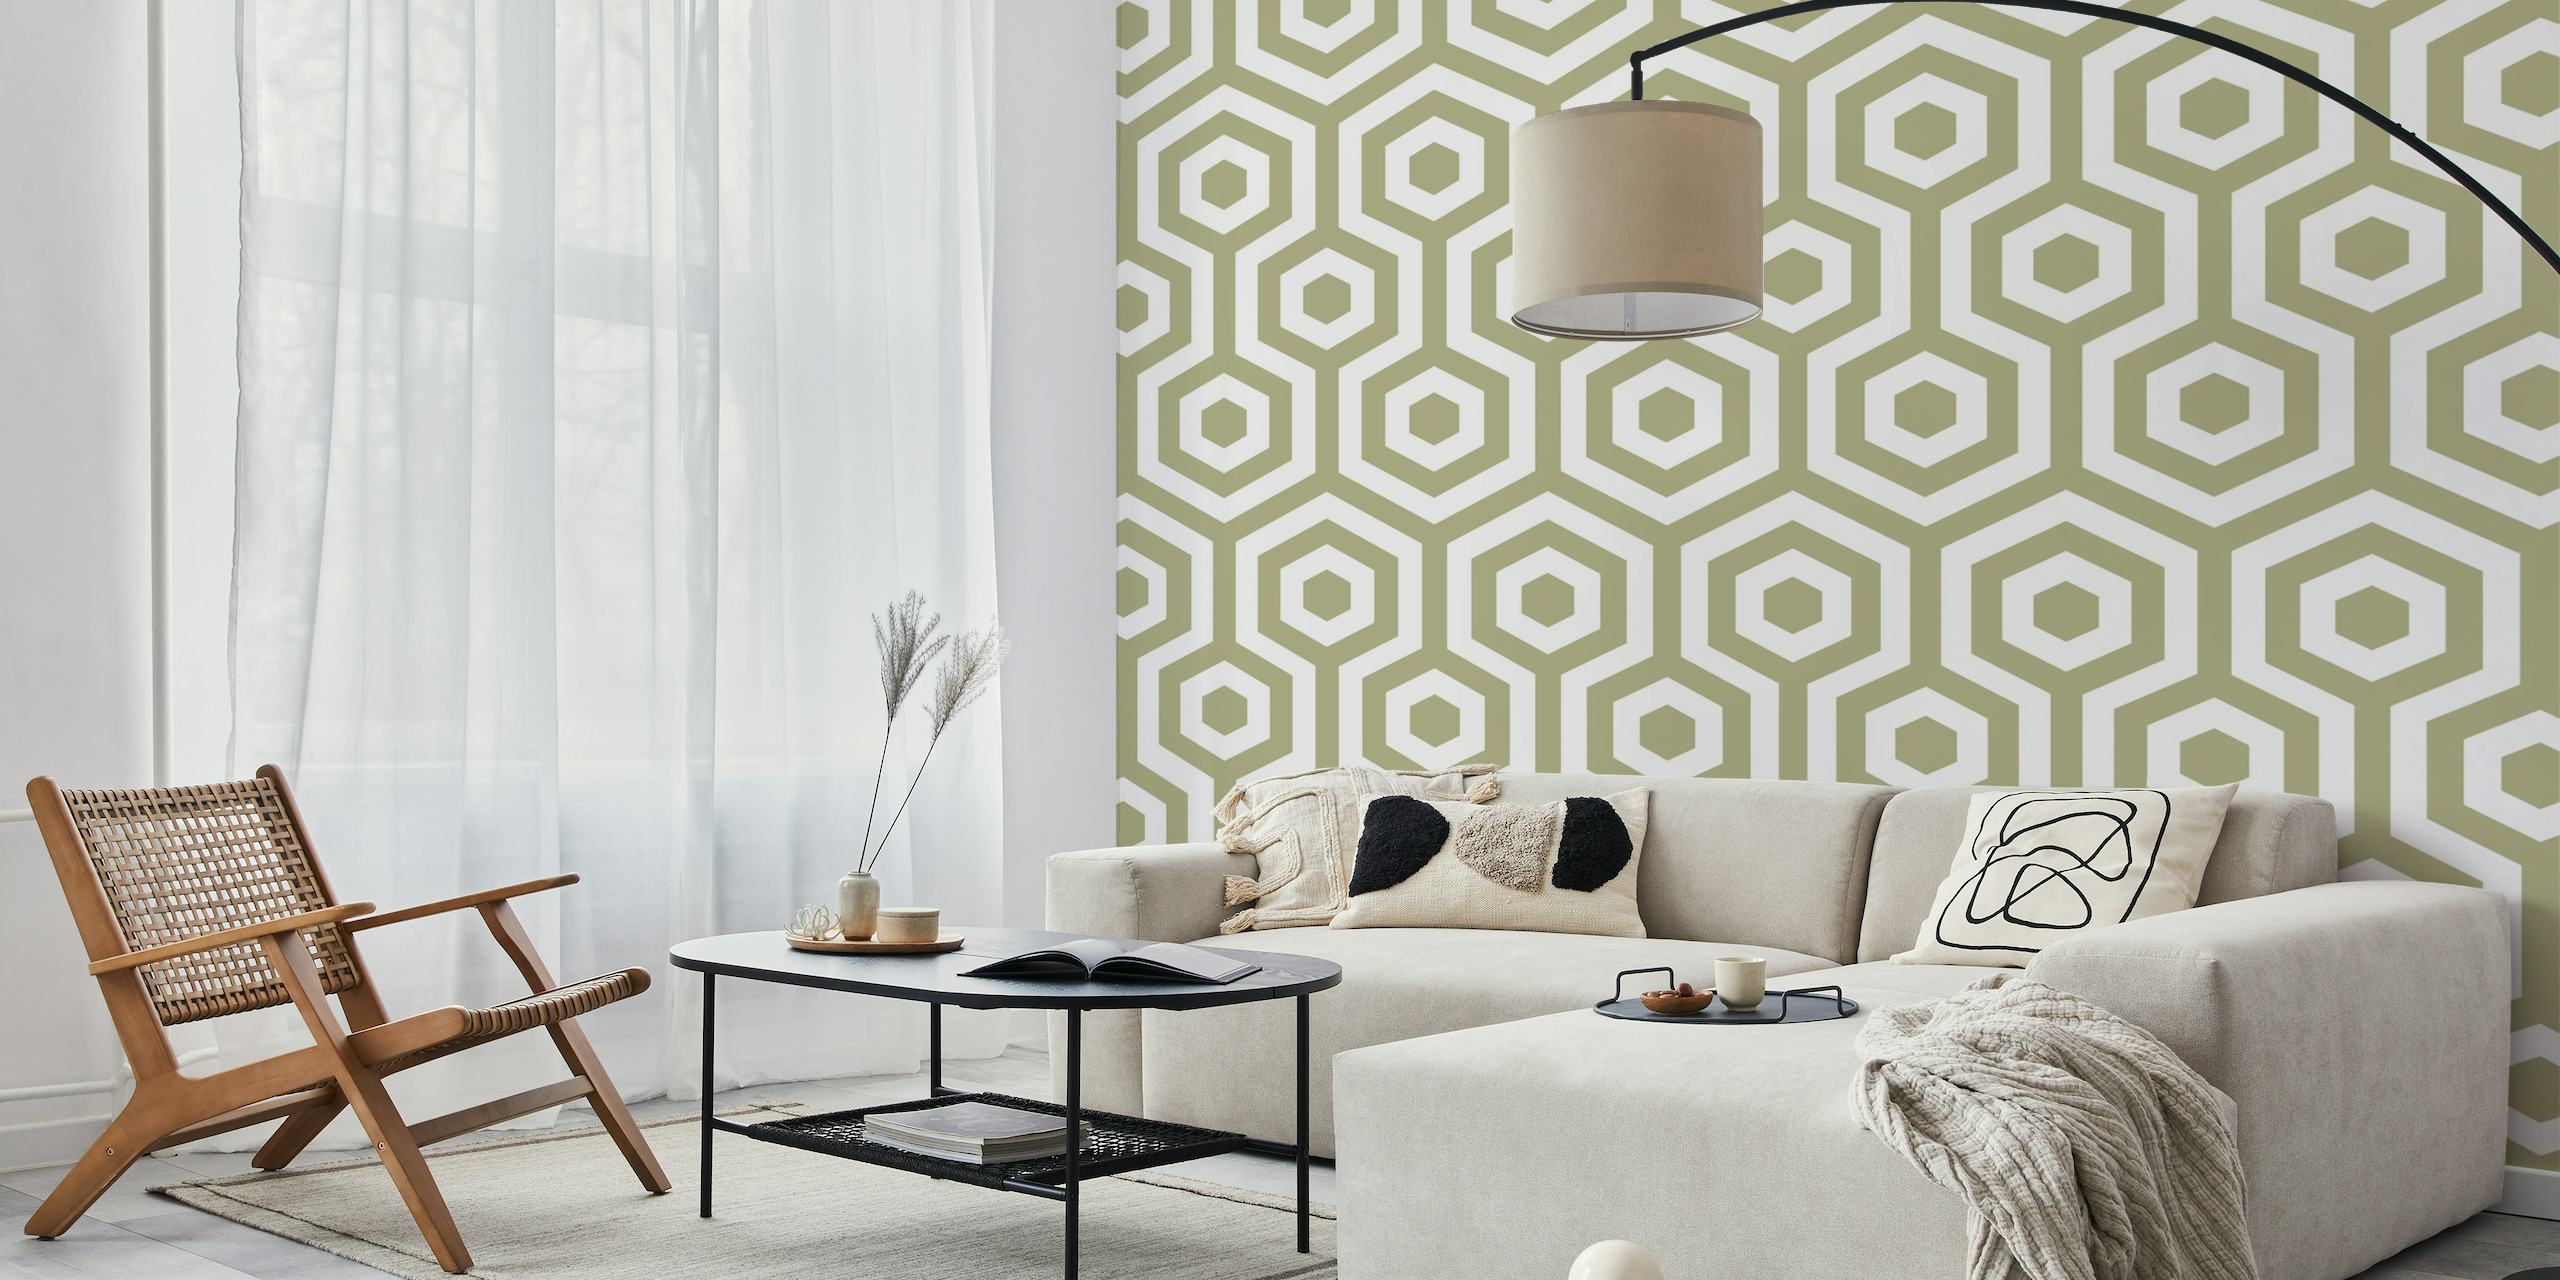 Beige and white 60s hexagon pattern wall mural